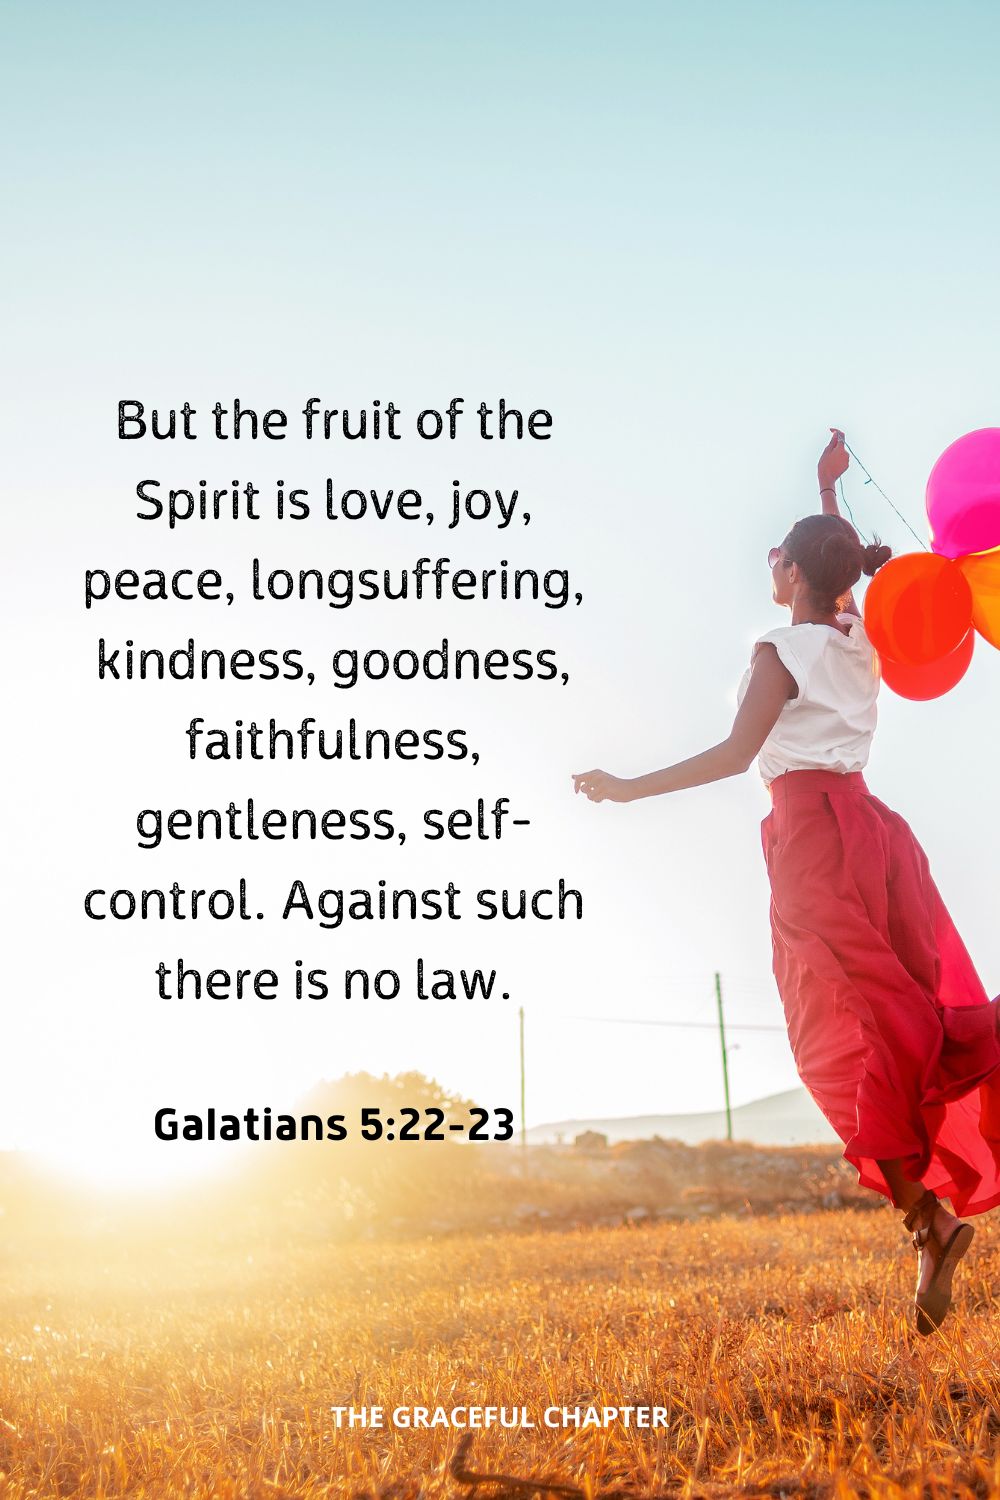 But the fruit of the Spirit is love, joy, peace, longsuffering, kindness, goodness, faithfulness, gentleness, self-control. Against such there is no law.